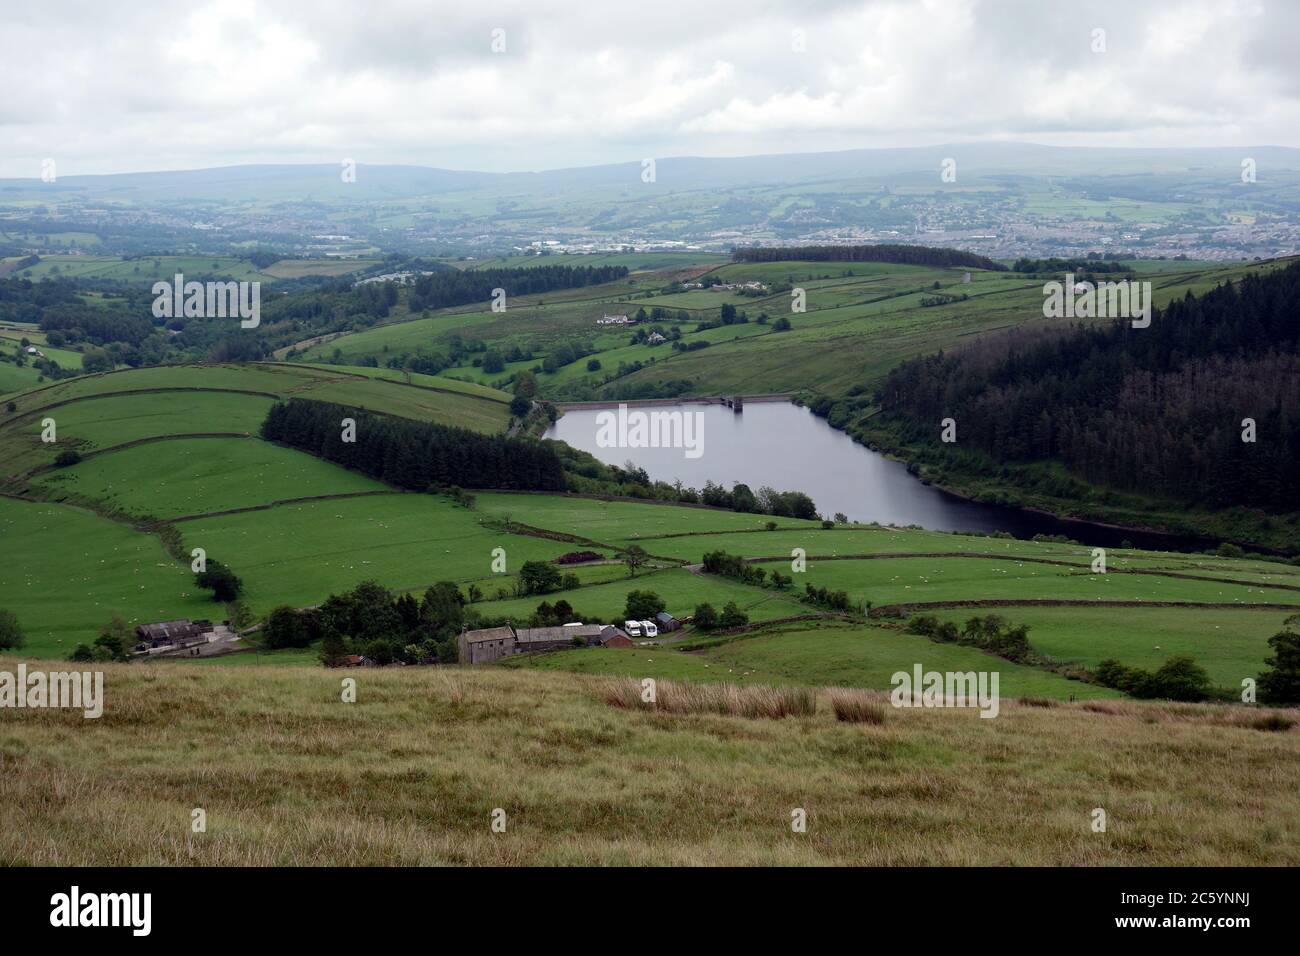 Lower Ogden Reservoir & the Village of Barley from near the Summit of Pendle Hill, Lancashire, England, UK. Stock Photo